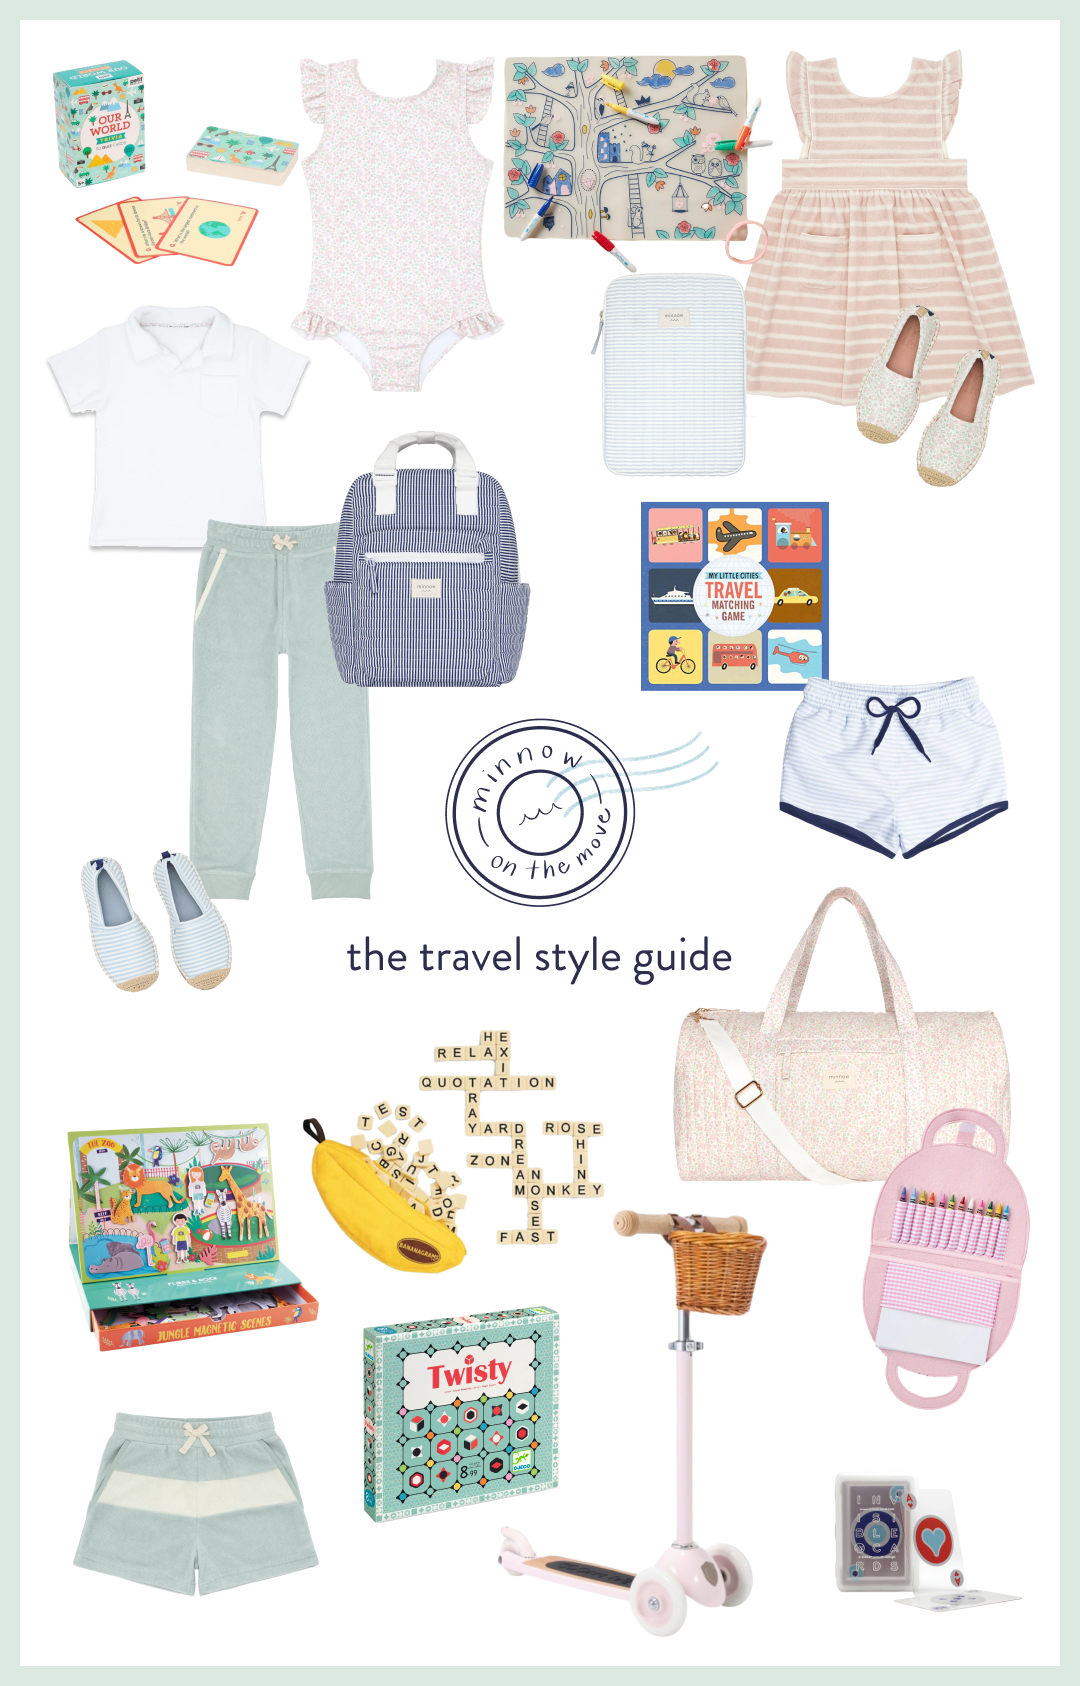 style guide of minnow and travel accessories